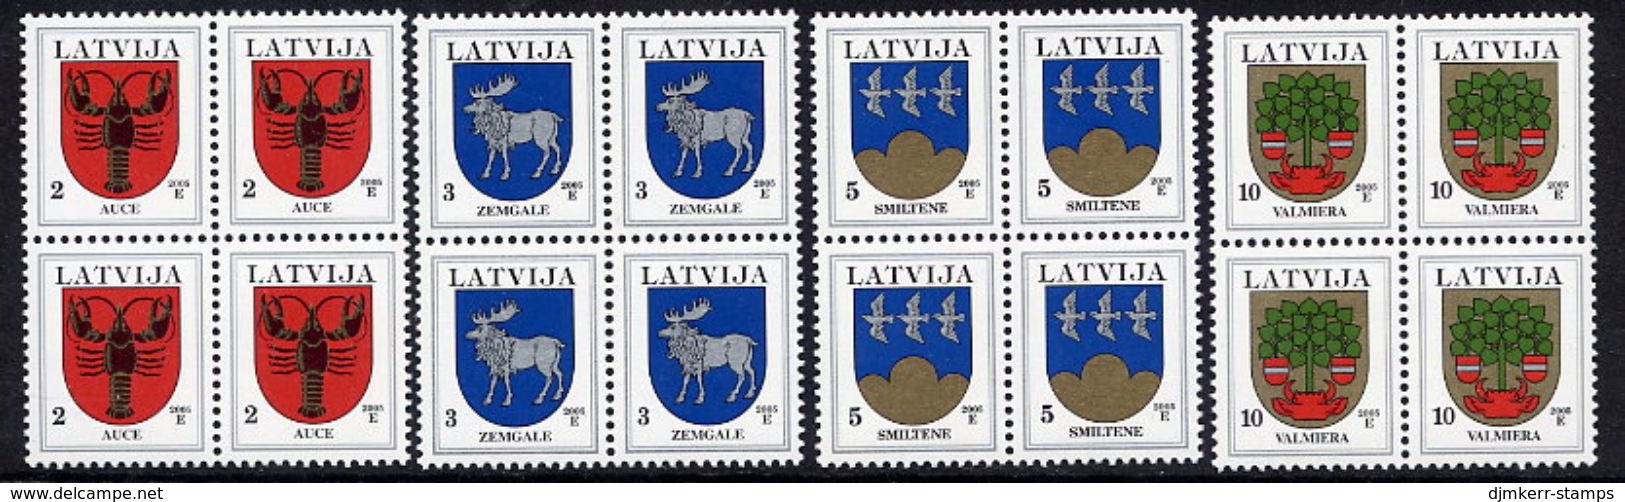 LATVIA 2005 Arms Definitives With Year Date 2005 In Blocks Of 4 MNH / **. - Lettonie